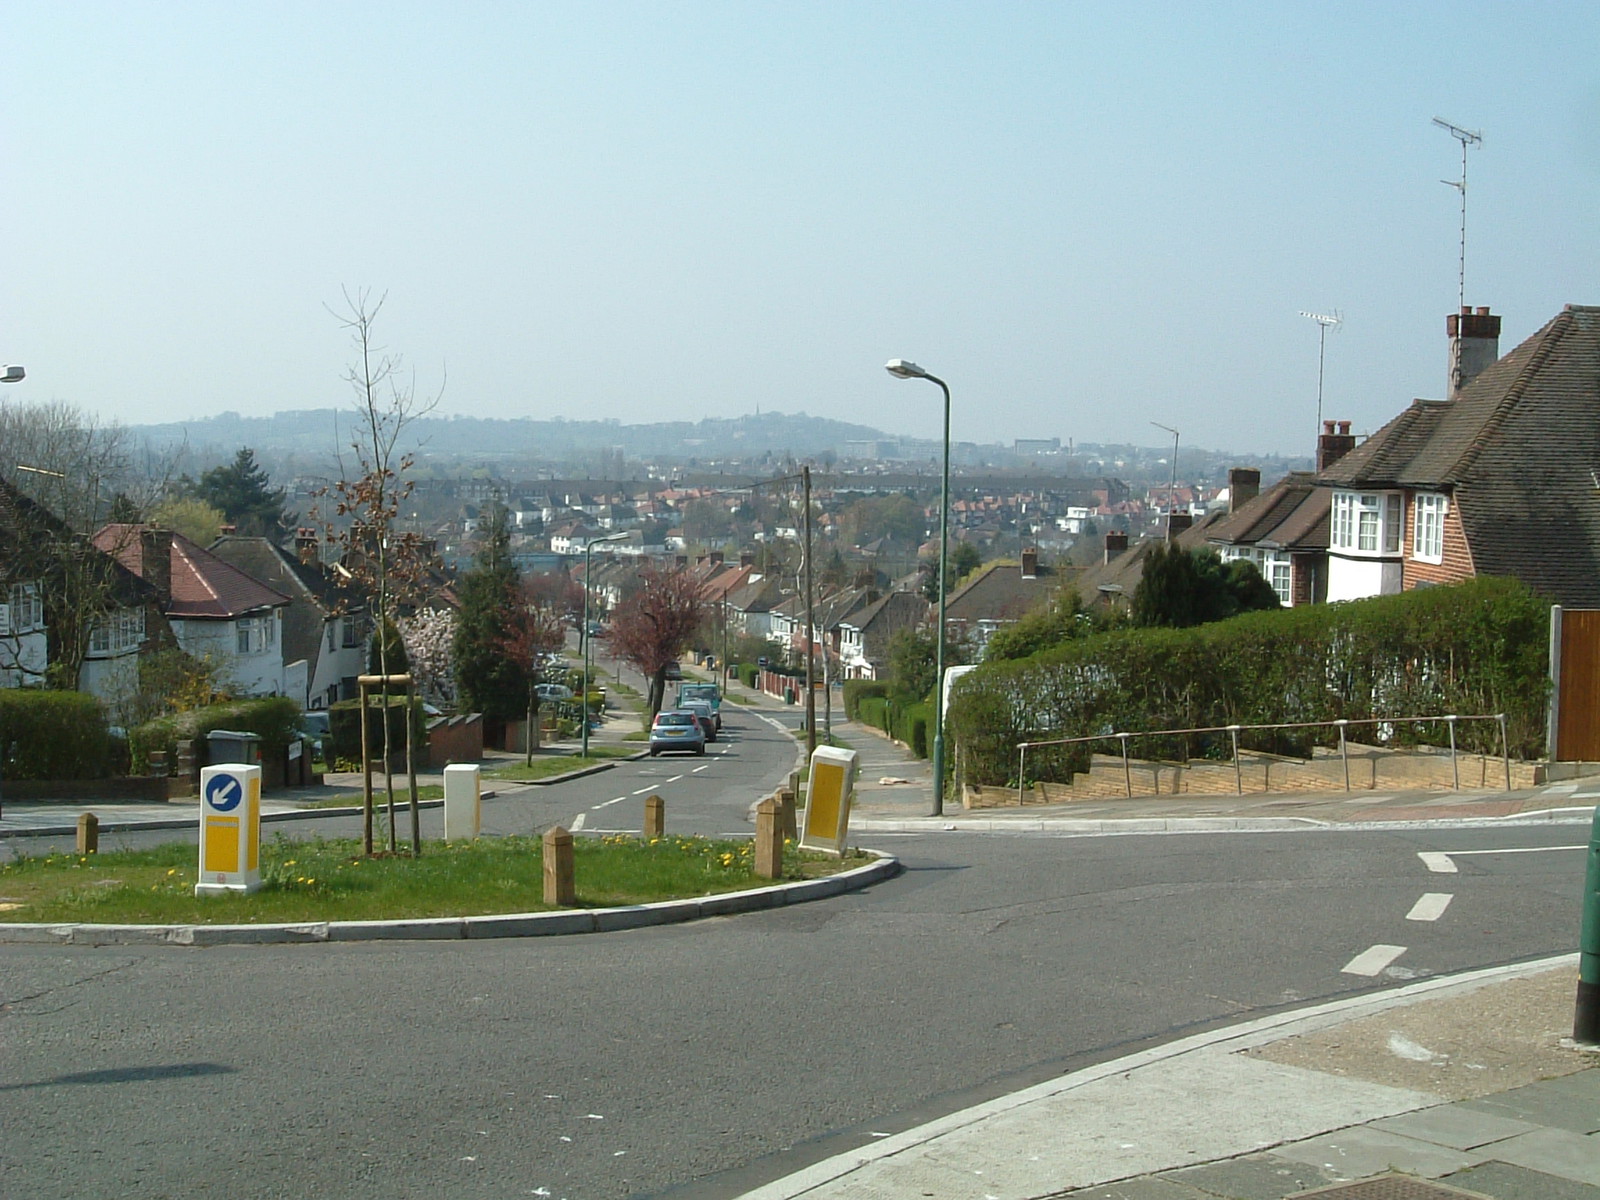 Looking down Barn Hill towards Harrow (though not from the Ring, as I took a wrong turning)